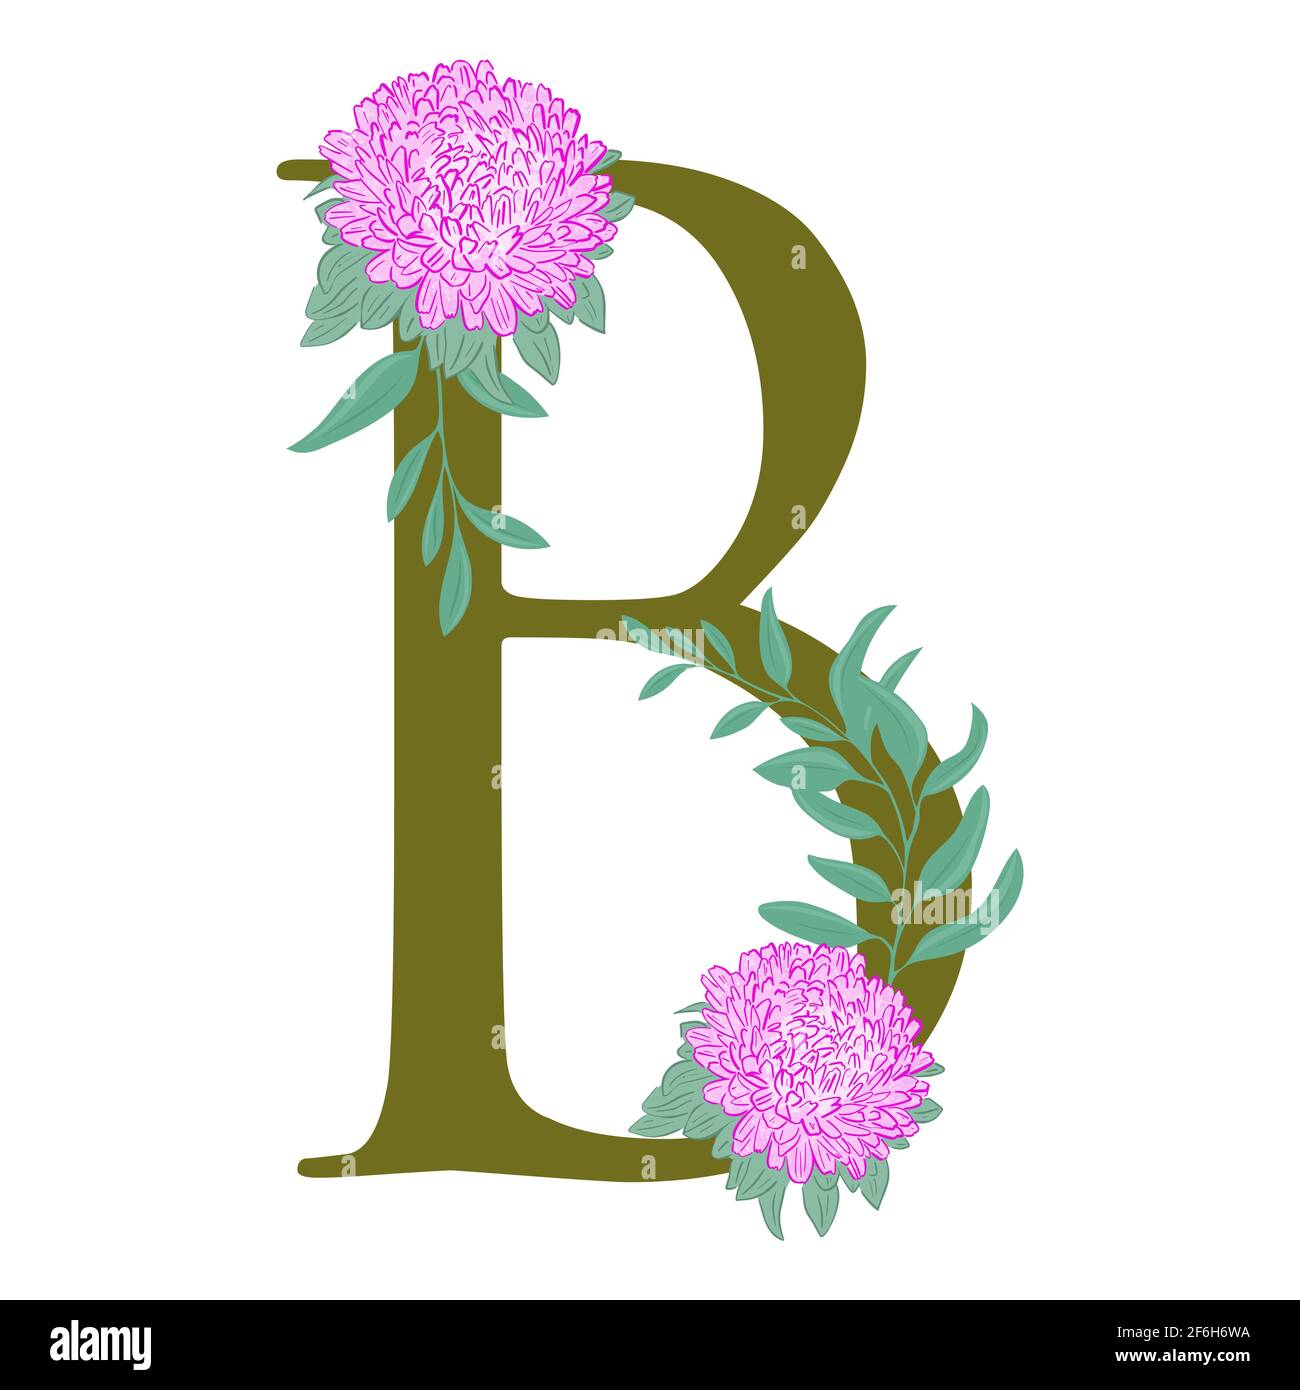 Capital letter b decorated with flowers and leaves. Letter of the English alphabet with floral decoration. Pink peonies and green foliage, vector. Stock Vector